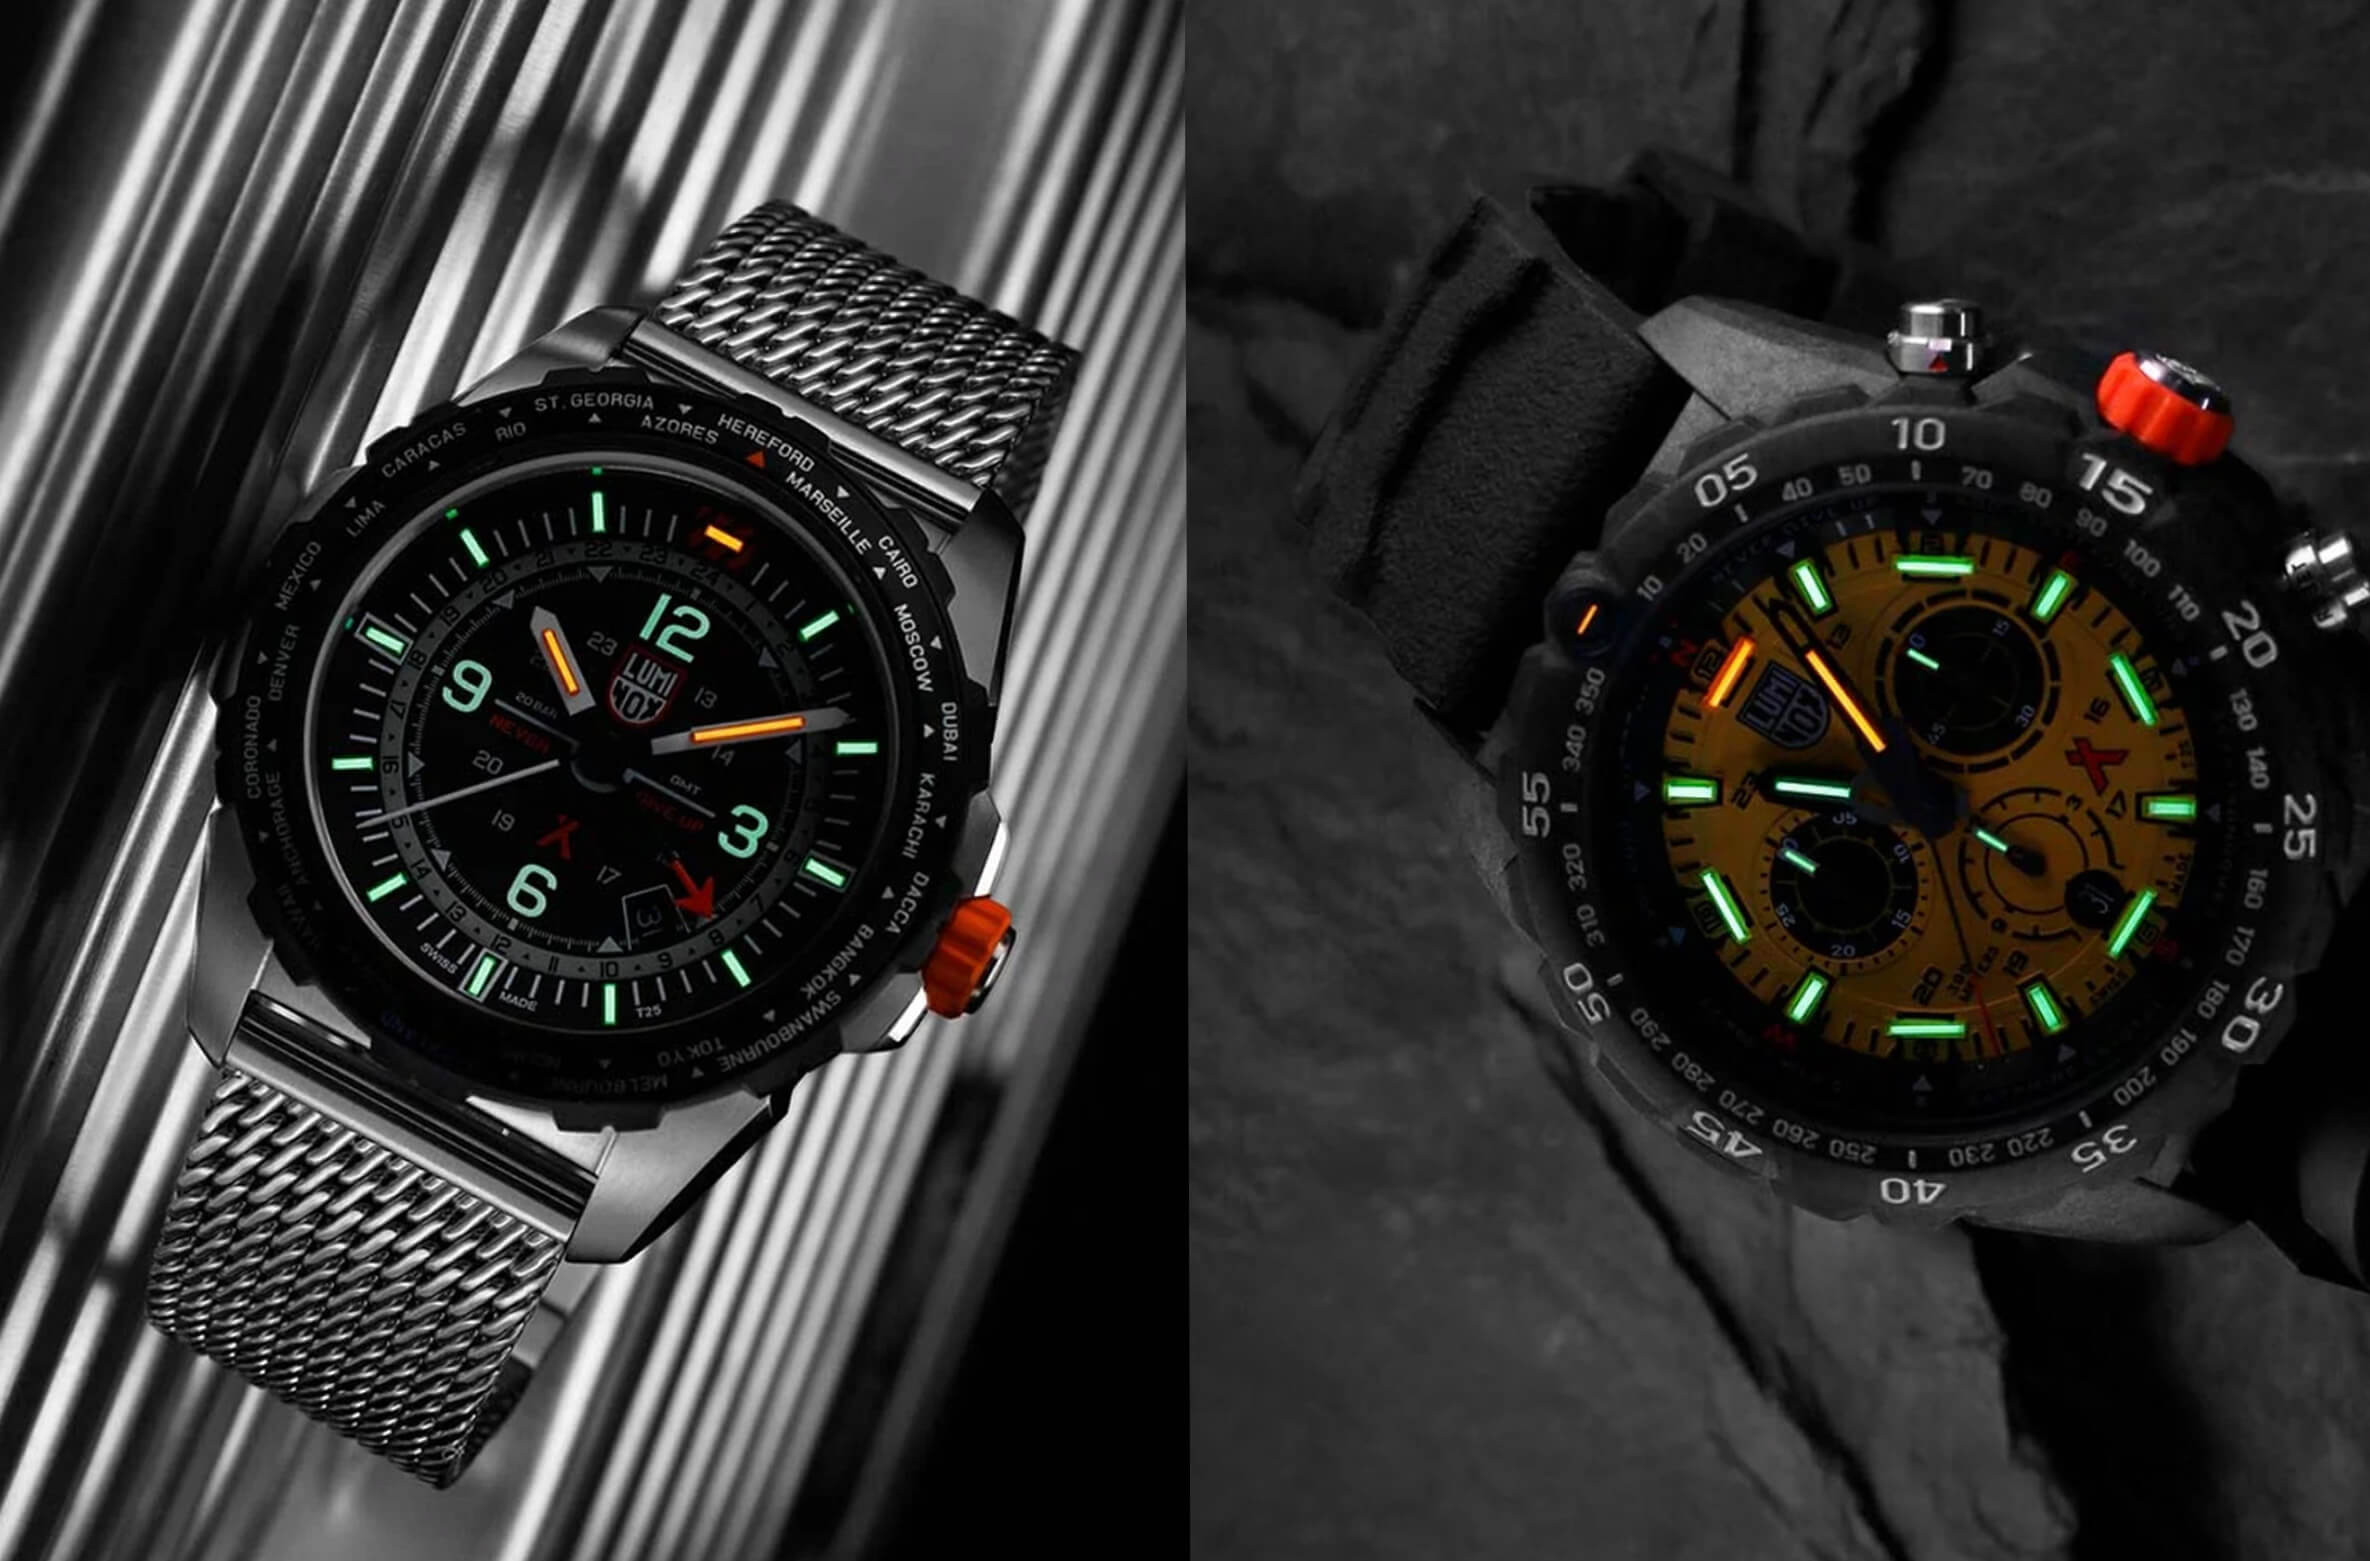 Bear Grylls Luminox Watches Are Made To Survive The Toughest Challenge